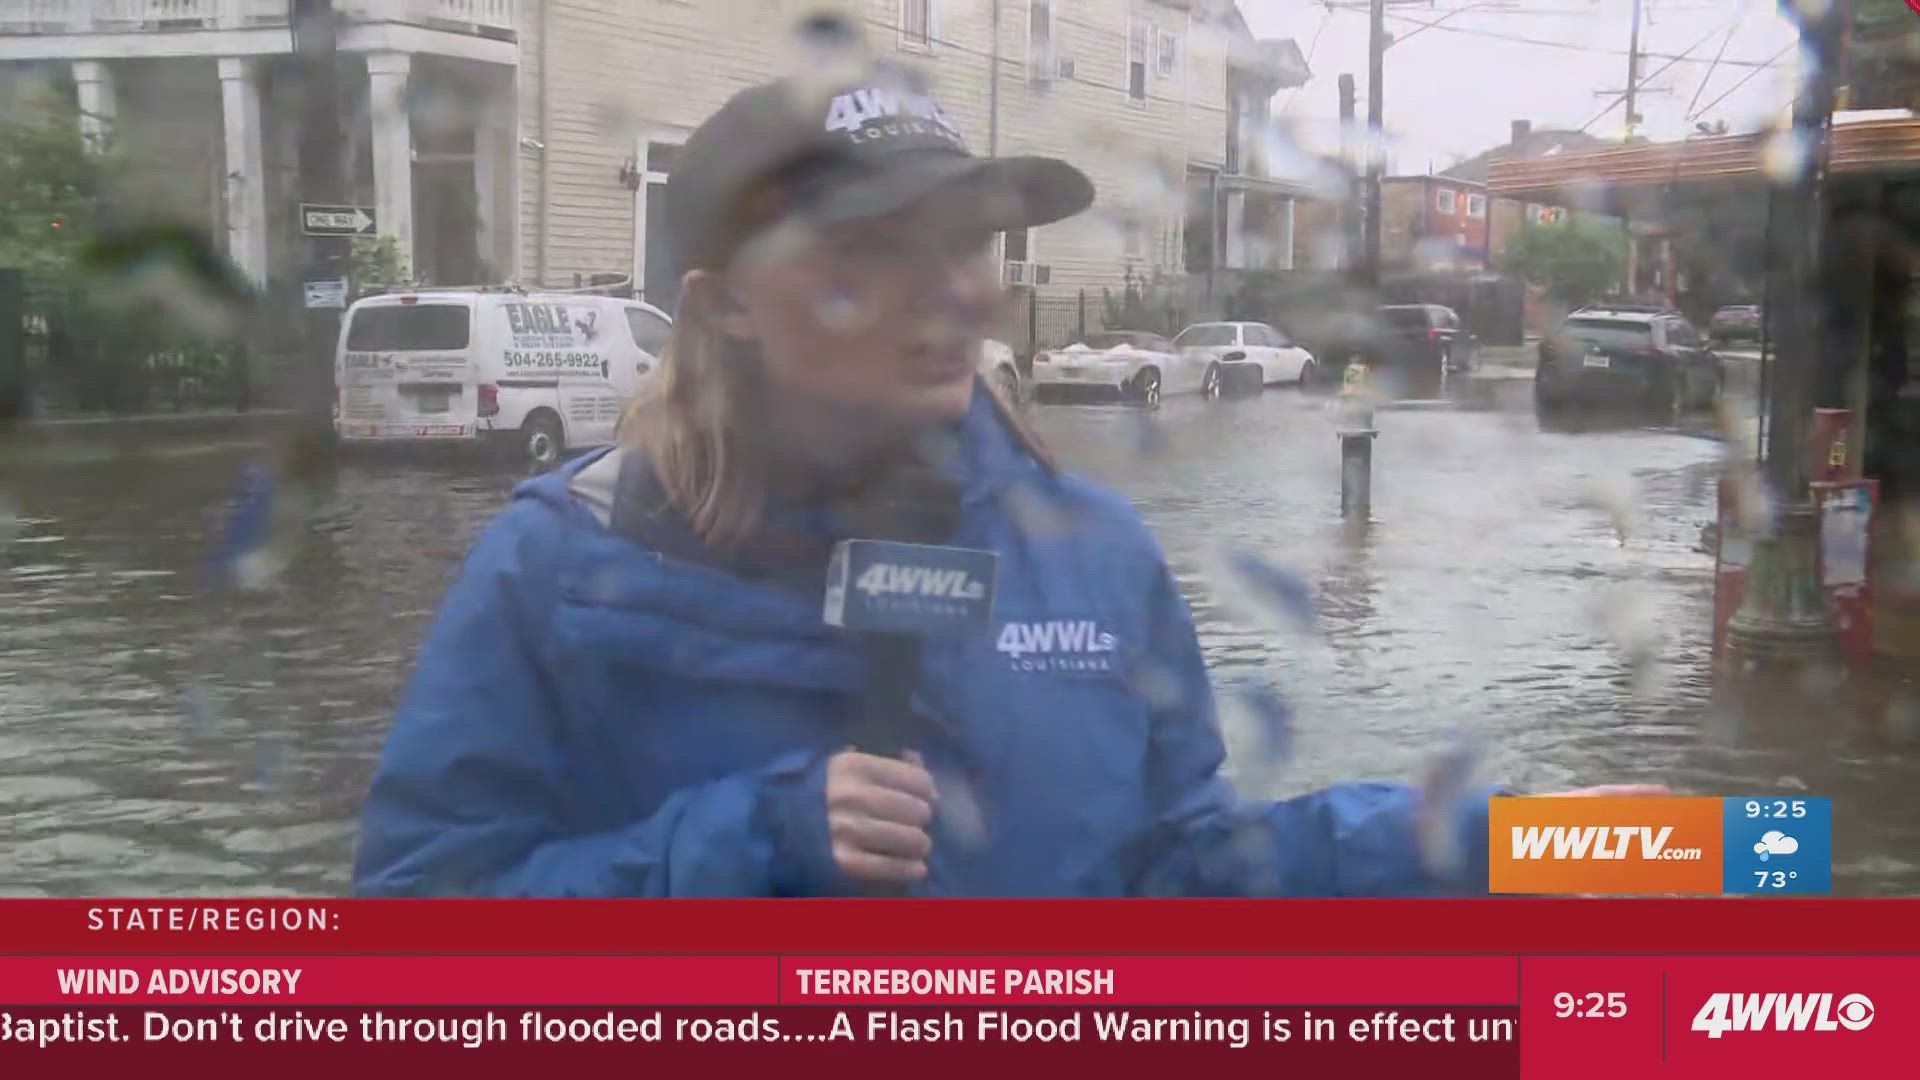 There is street flooding in parts of New Orleans, closing some underpasses. Reporter Lily Cummings has the update.